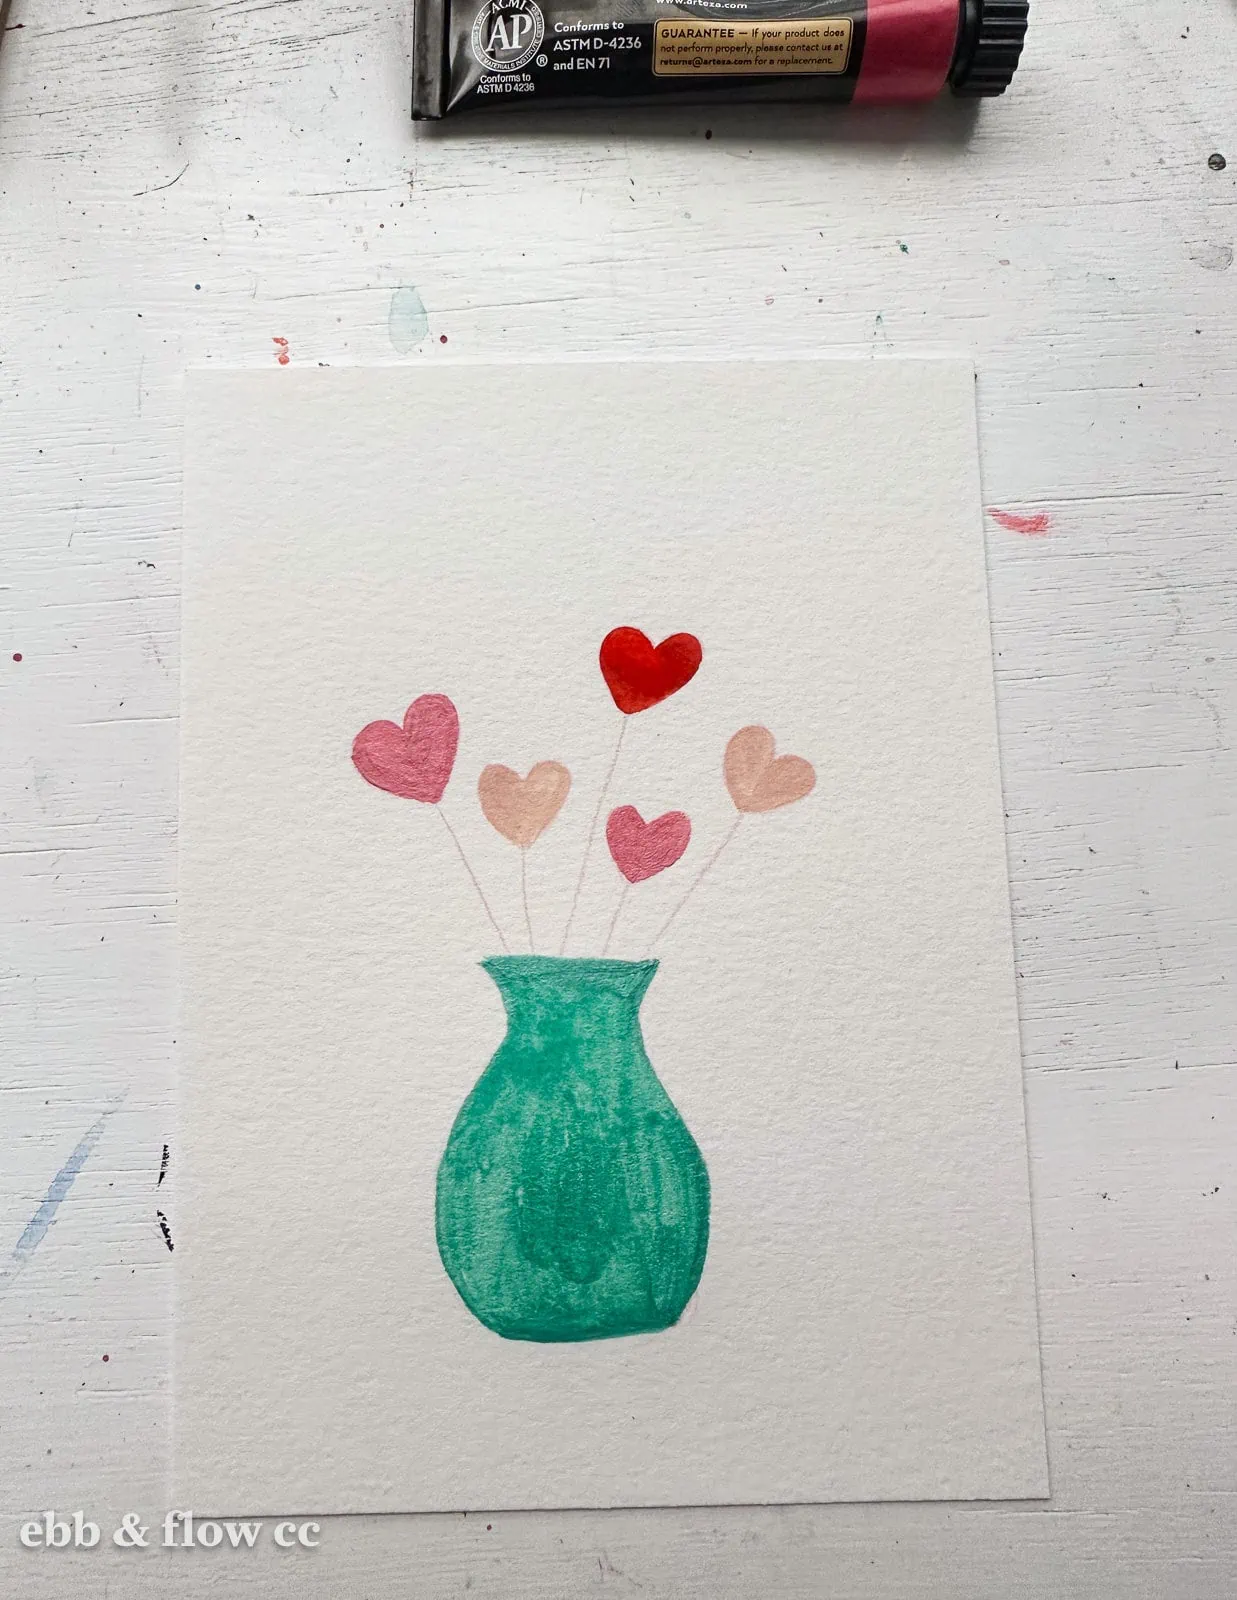 green vase with pink hearts